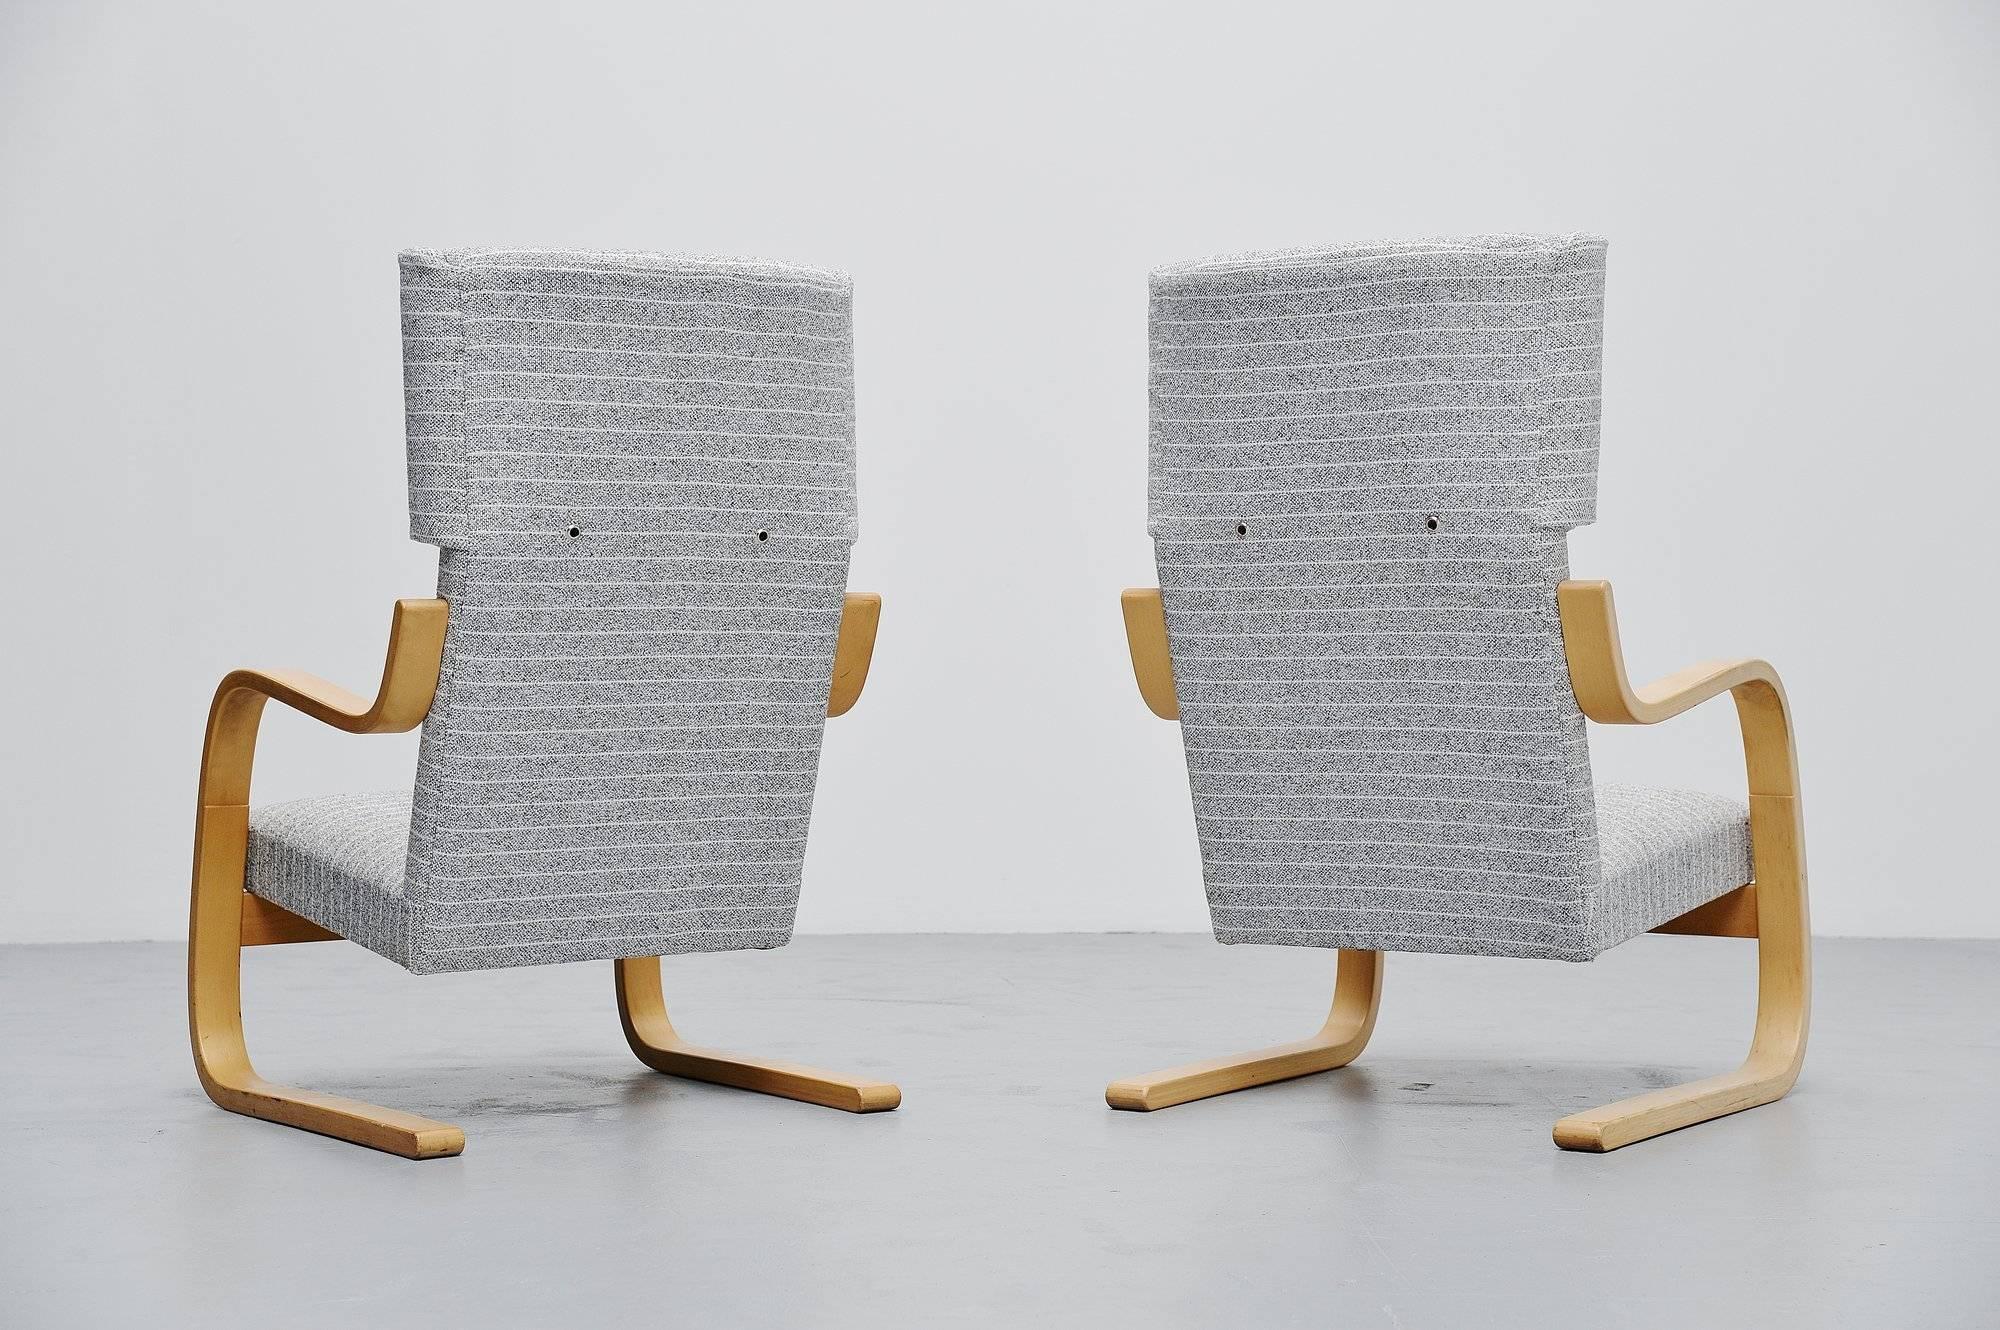 Stylish pair of wingback lounge chairs model 401 designed by Alvar Aalto for Artek, Finland, 1933. These chairs were purchased at Metz and Co. in the 1970s. The chairs have a birch plywood frame and newly upholstered light grey striped fabric. The